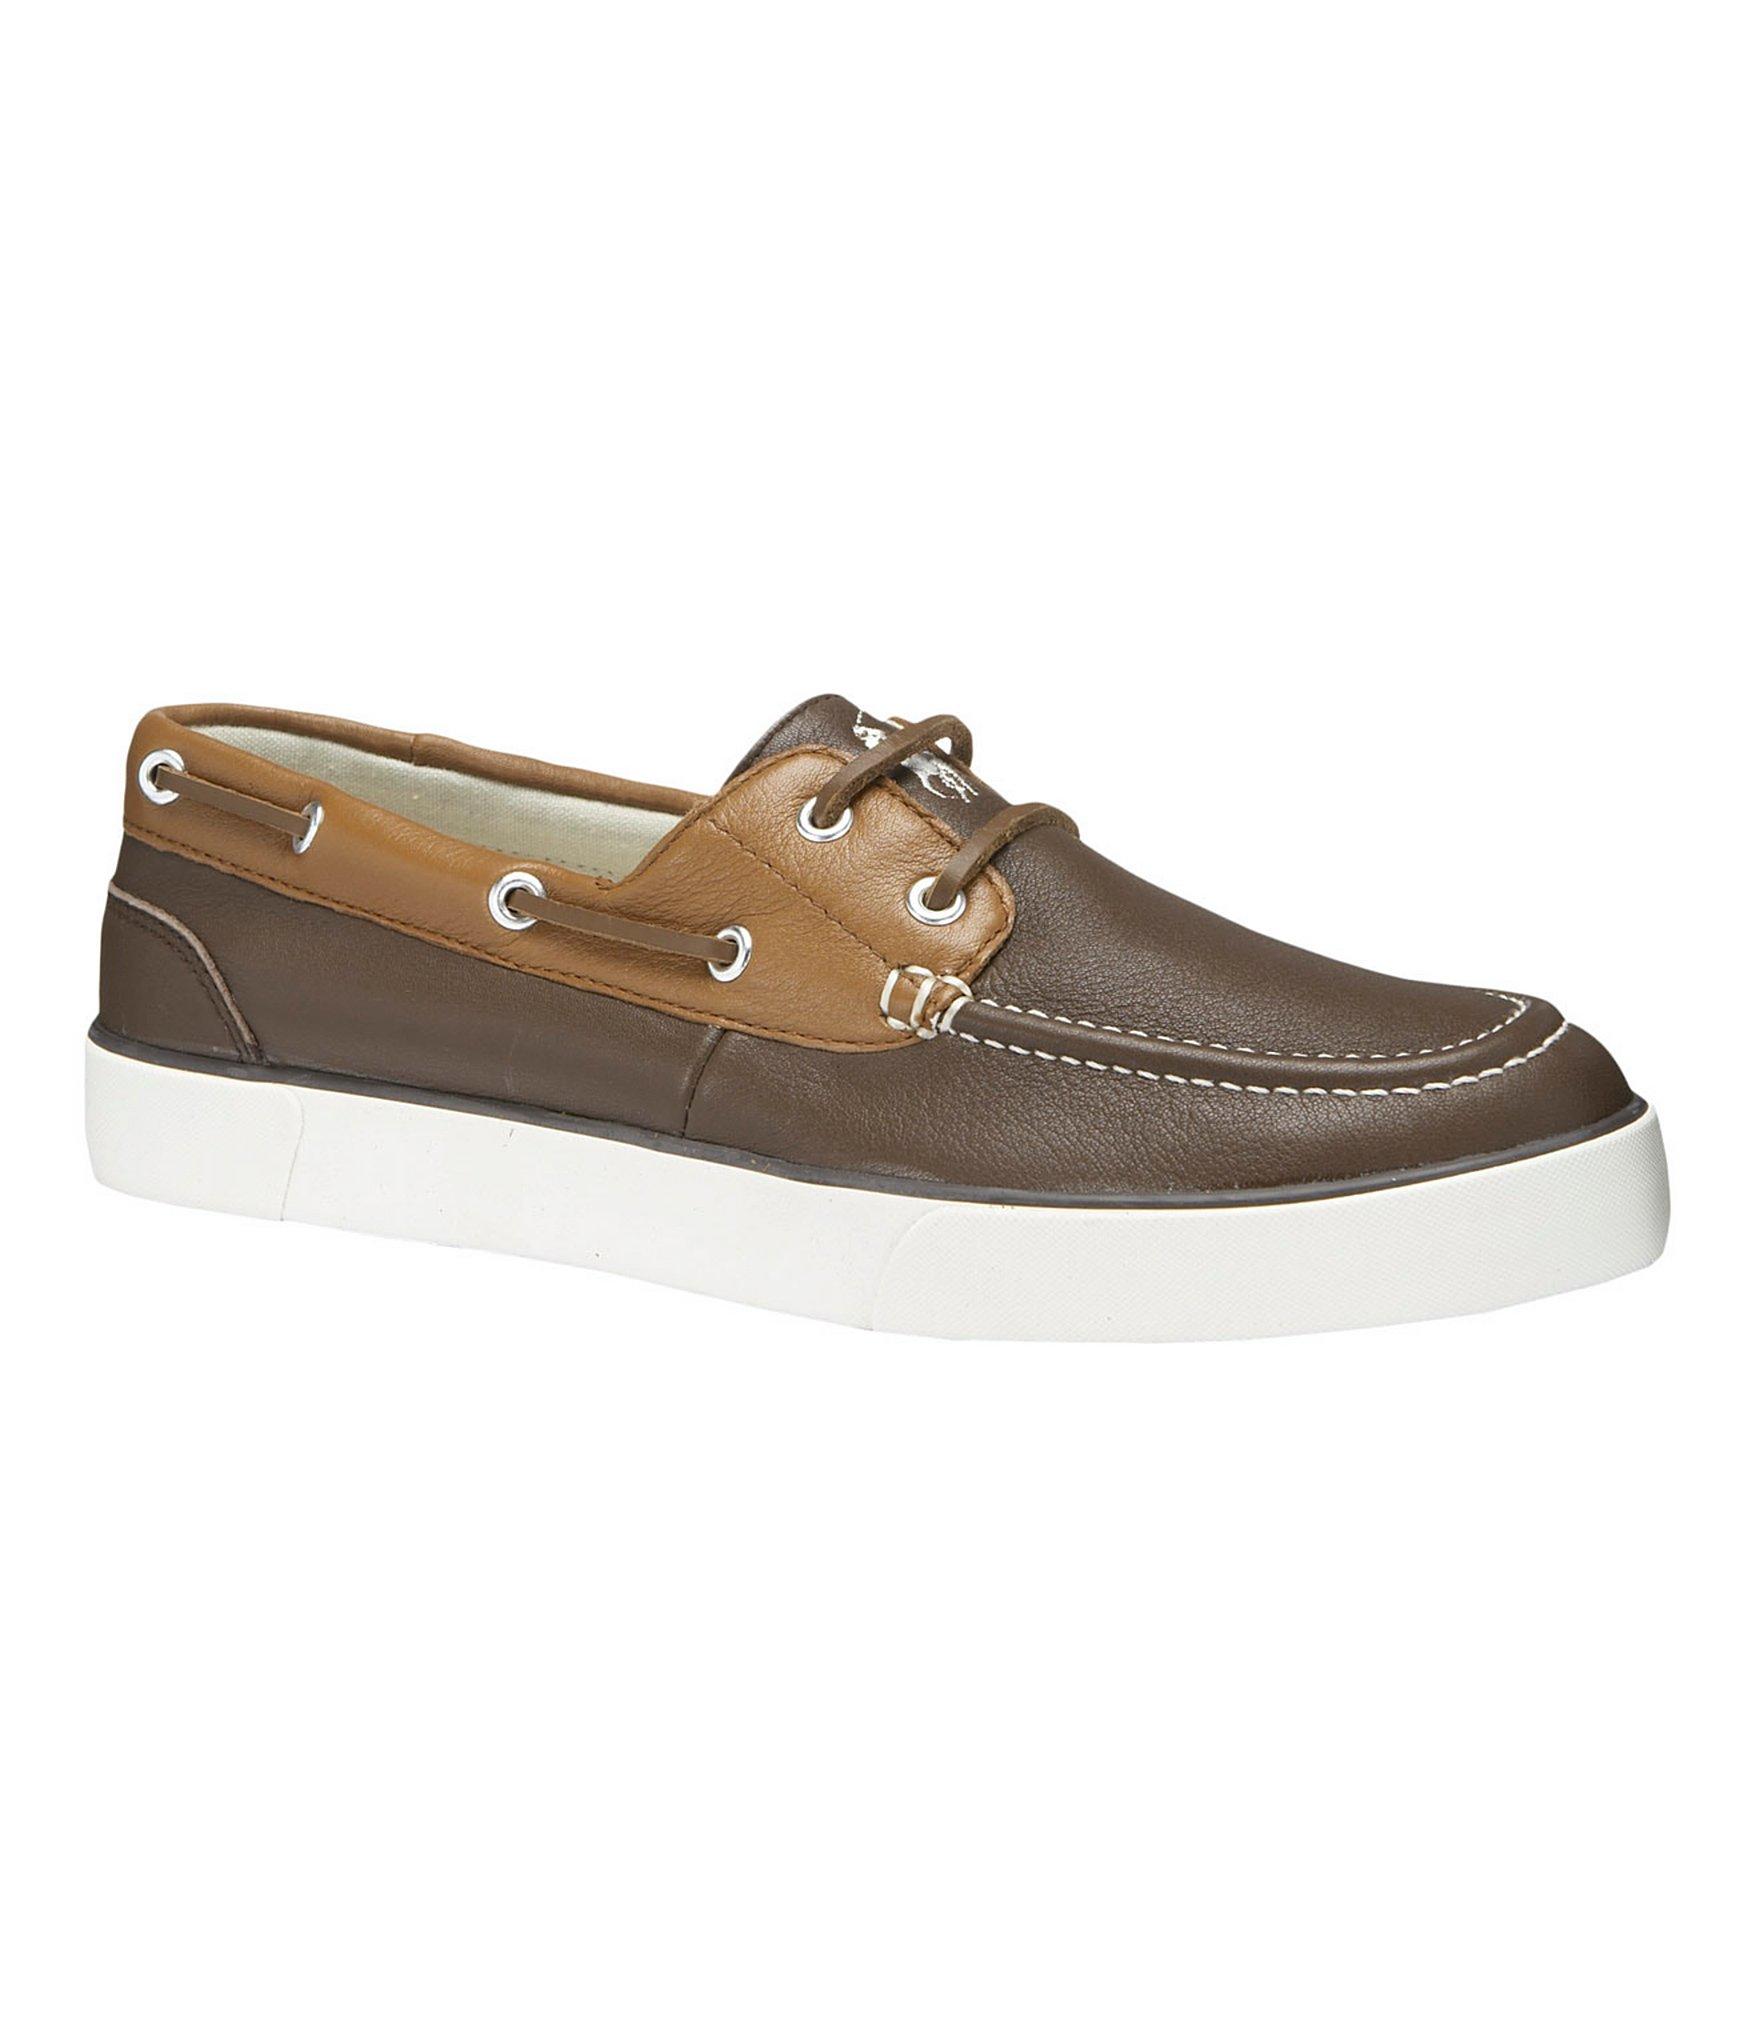 Polo ralph lauren Sander Leather Boat Shoes in Brown for